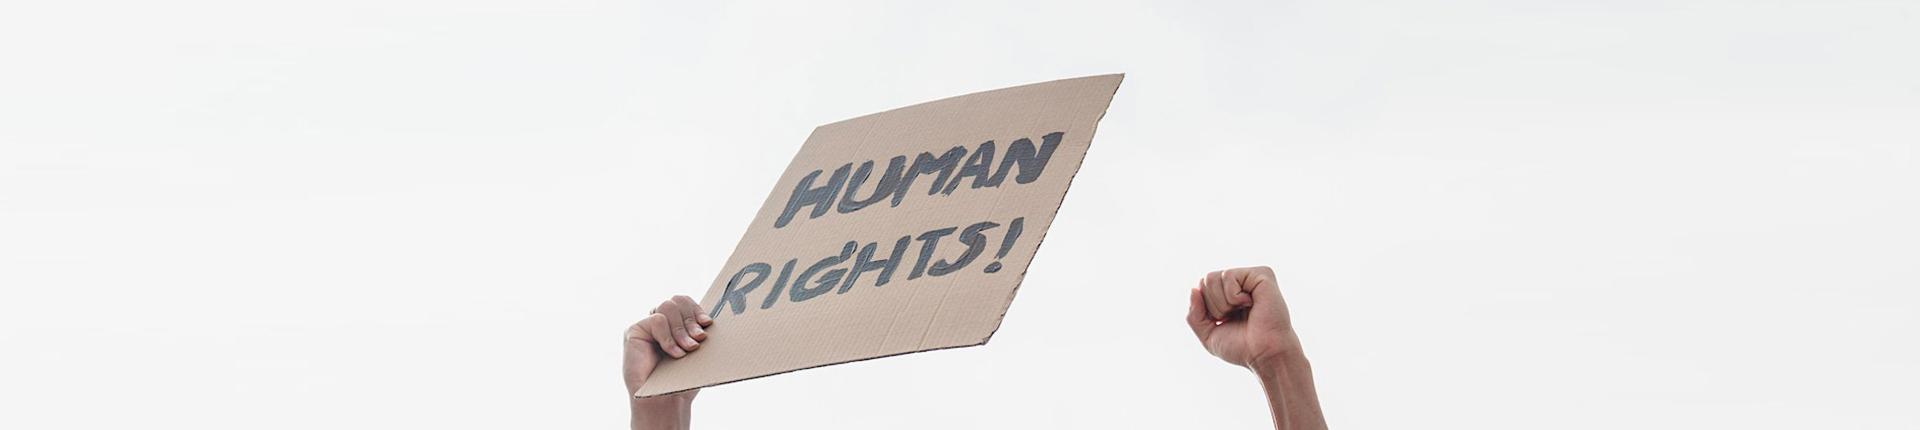 Hand holding a sign that says Human Rights